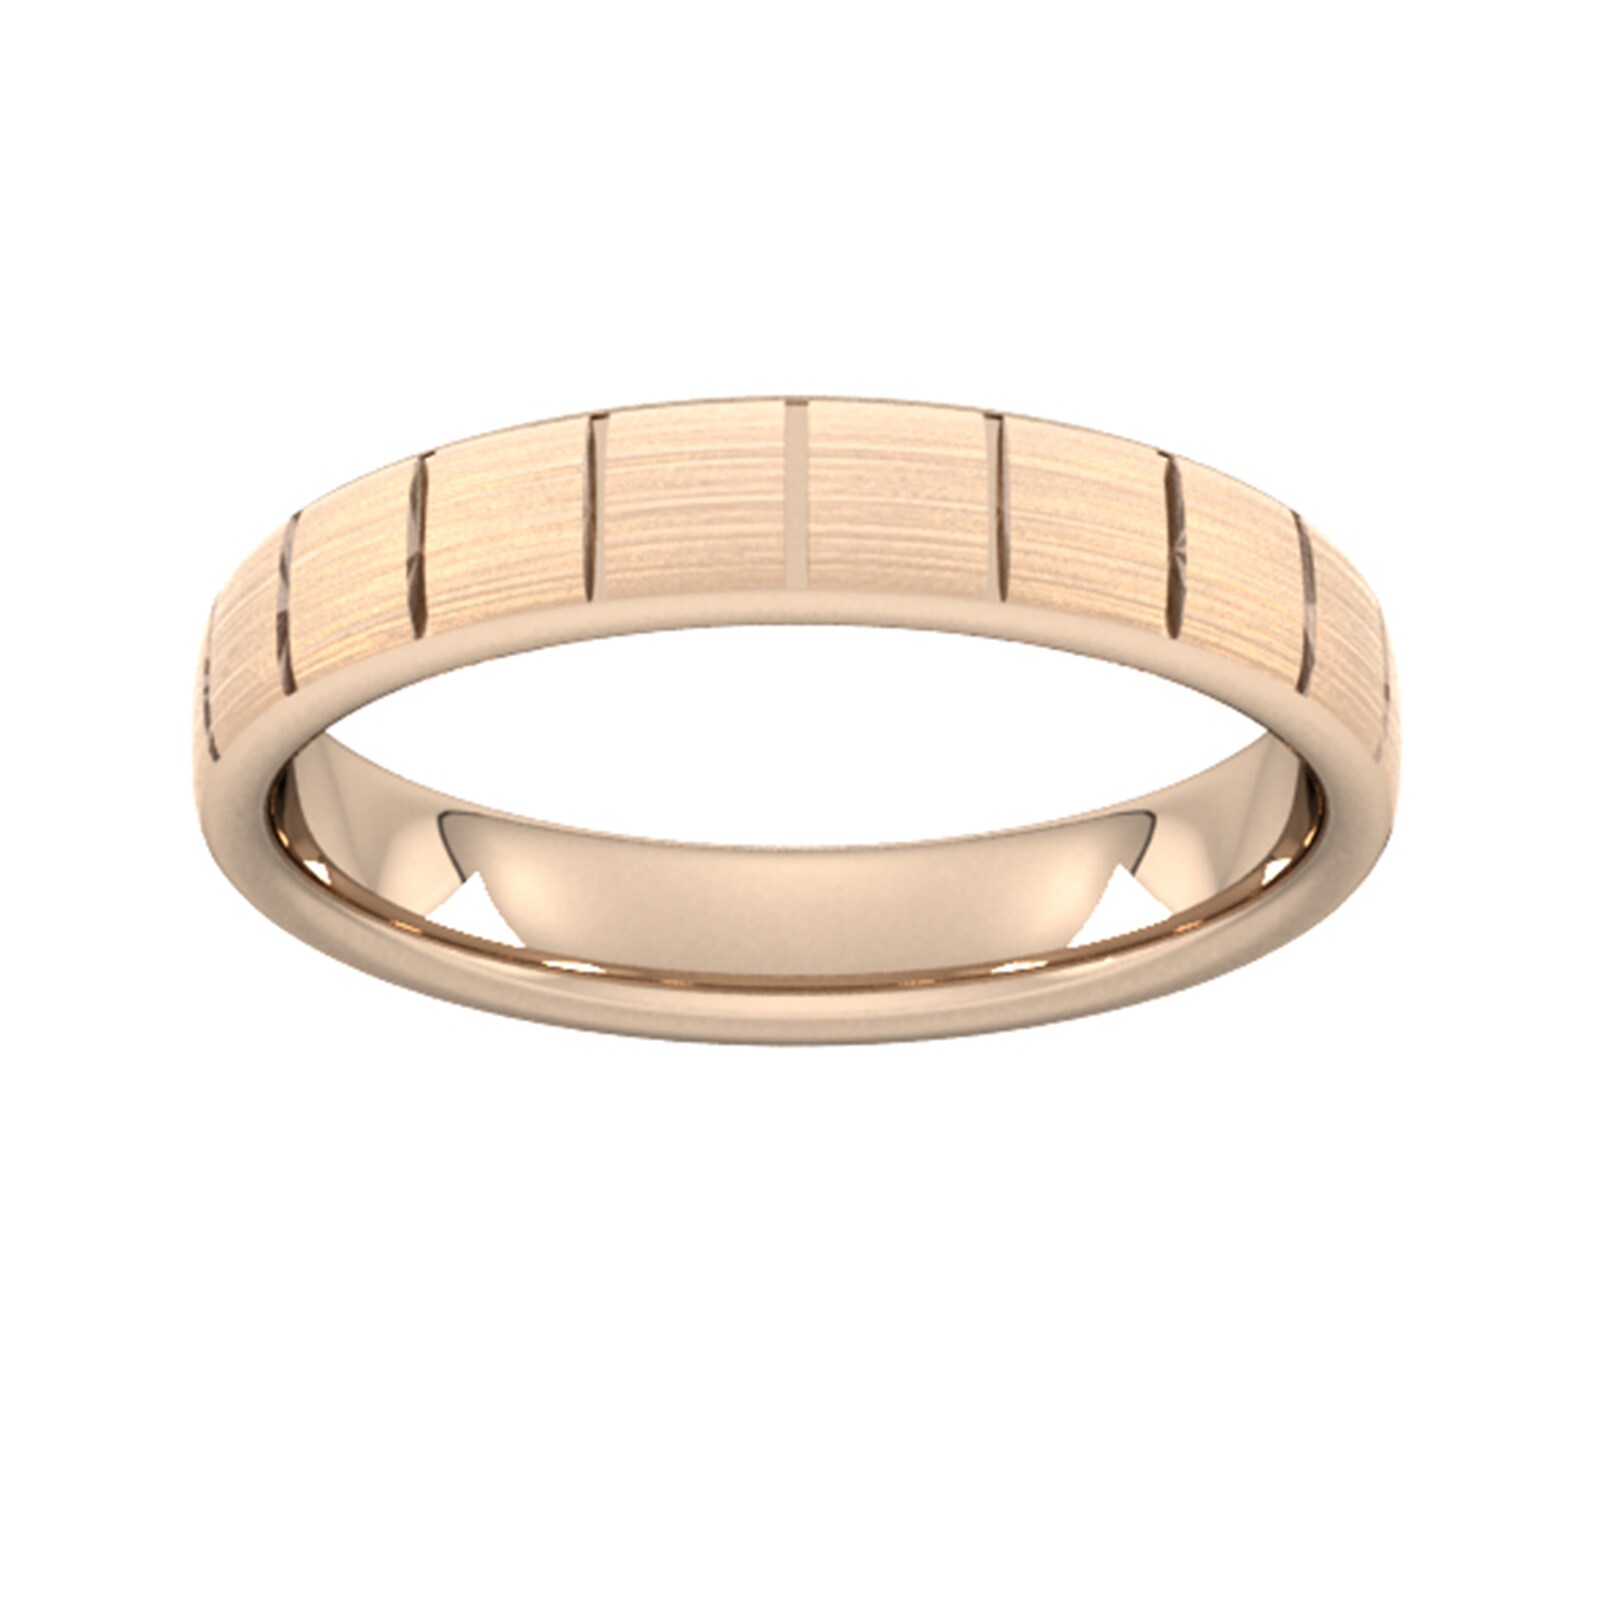 4mm Flat Court Heavy Vertical Lines Wedding Ring In 9 Carat Rose Gold - Ring Size K